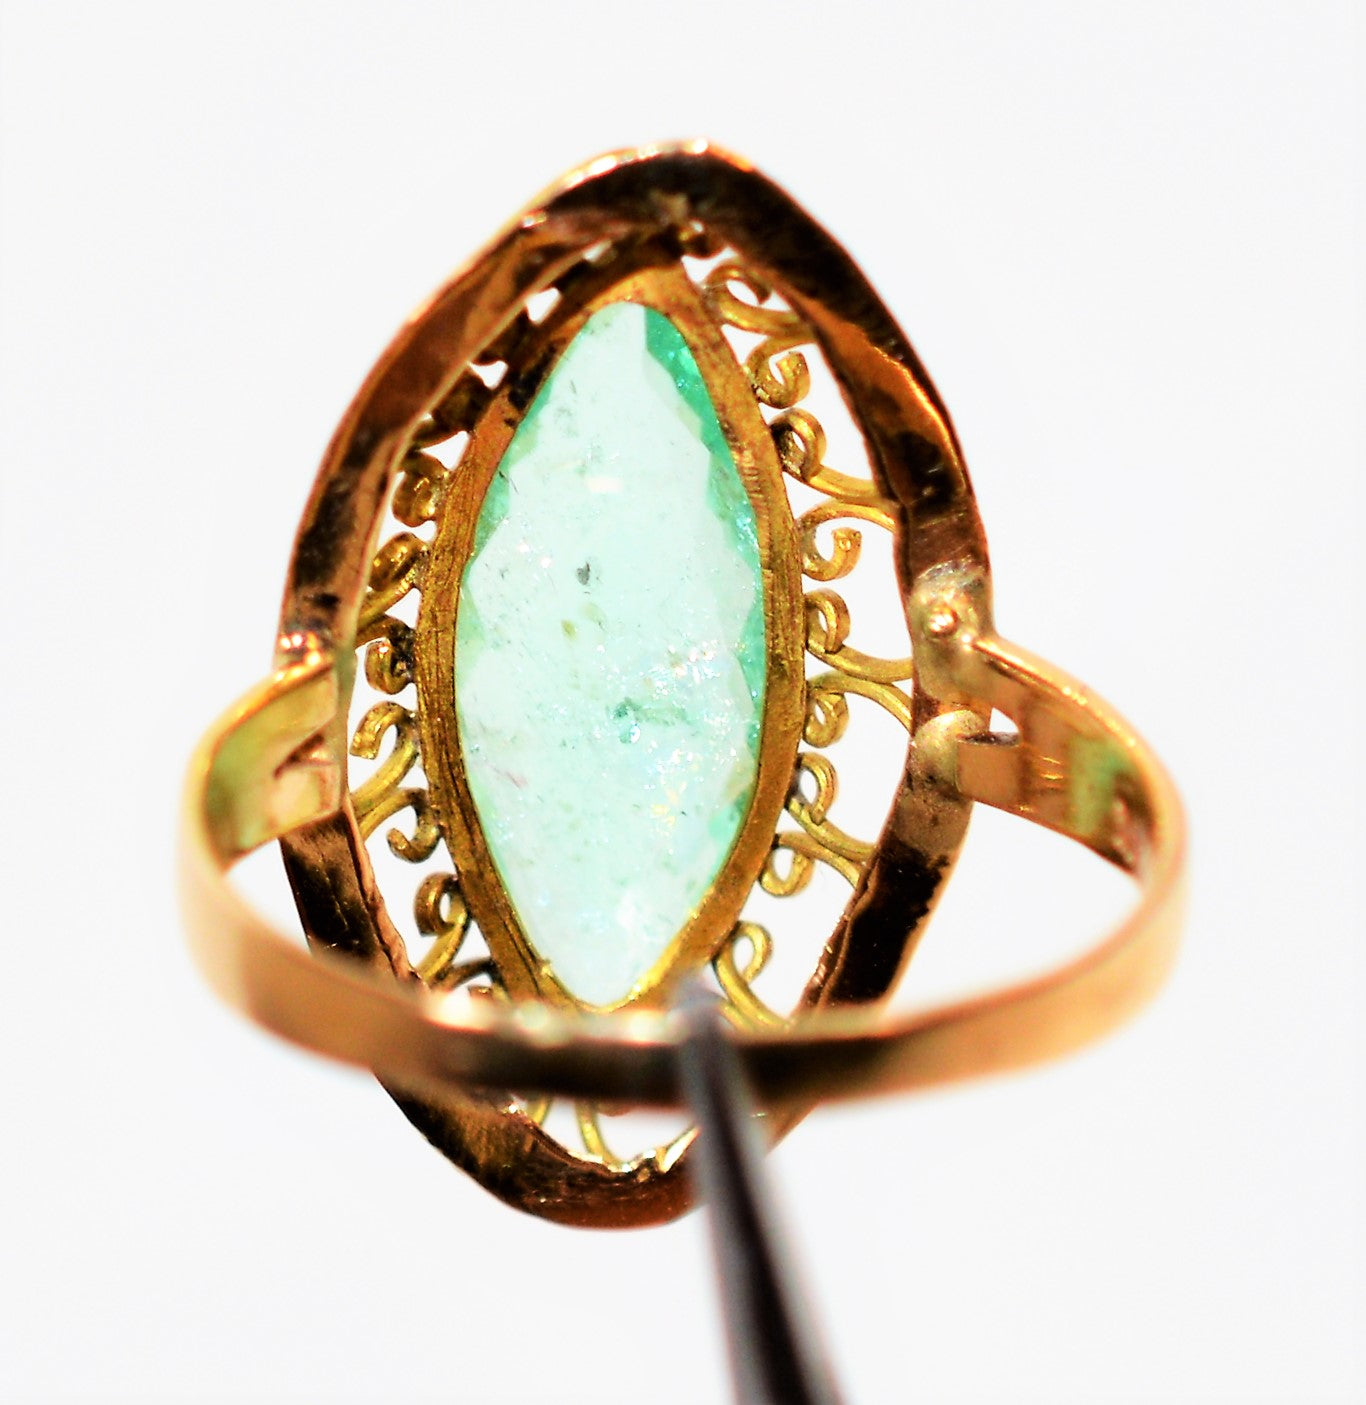 Natural Paraiba Tourmaline Ring 14K Solid Gold 2.38ct Art Deco Ring Solitaire Ring Women's Ring Cocktail Ring Birthstone Ring Vintage Jewelry